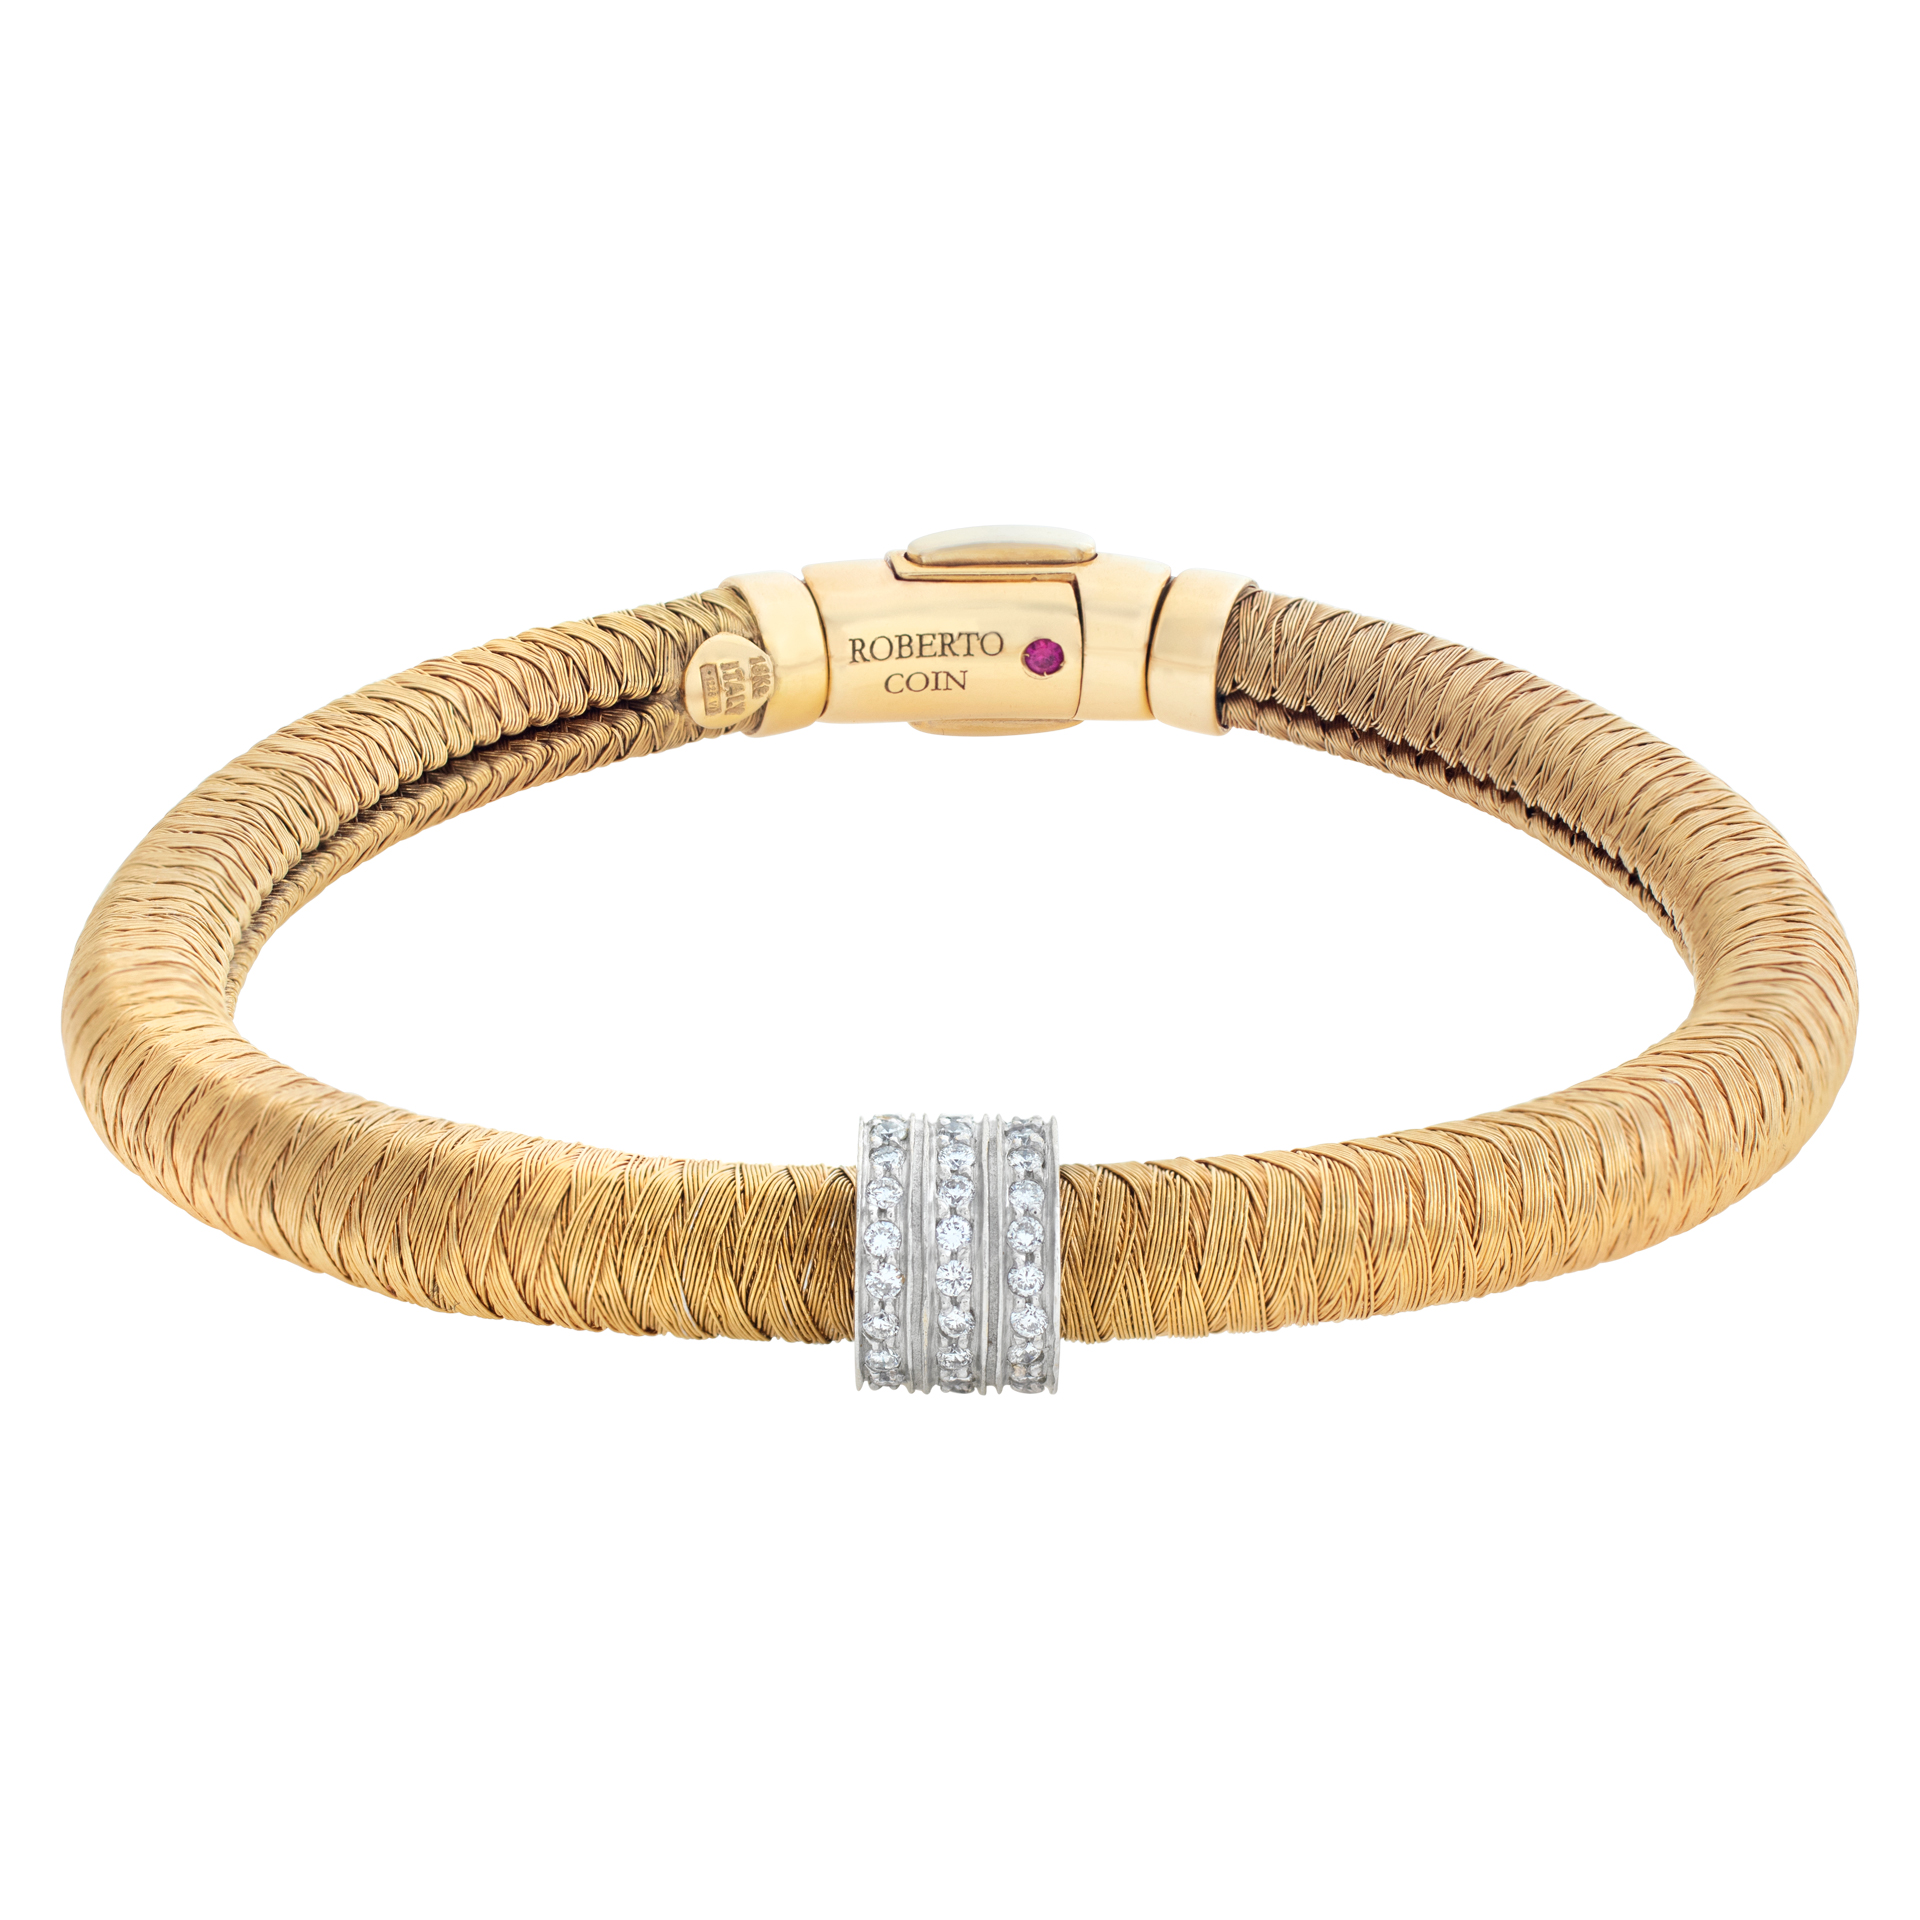 Roberto Coin Primavera Collection, Flexible Weaved Coil Bracelet In 18k Yellow Gold With One White Gold Diamond Station